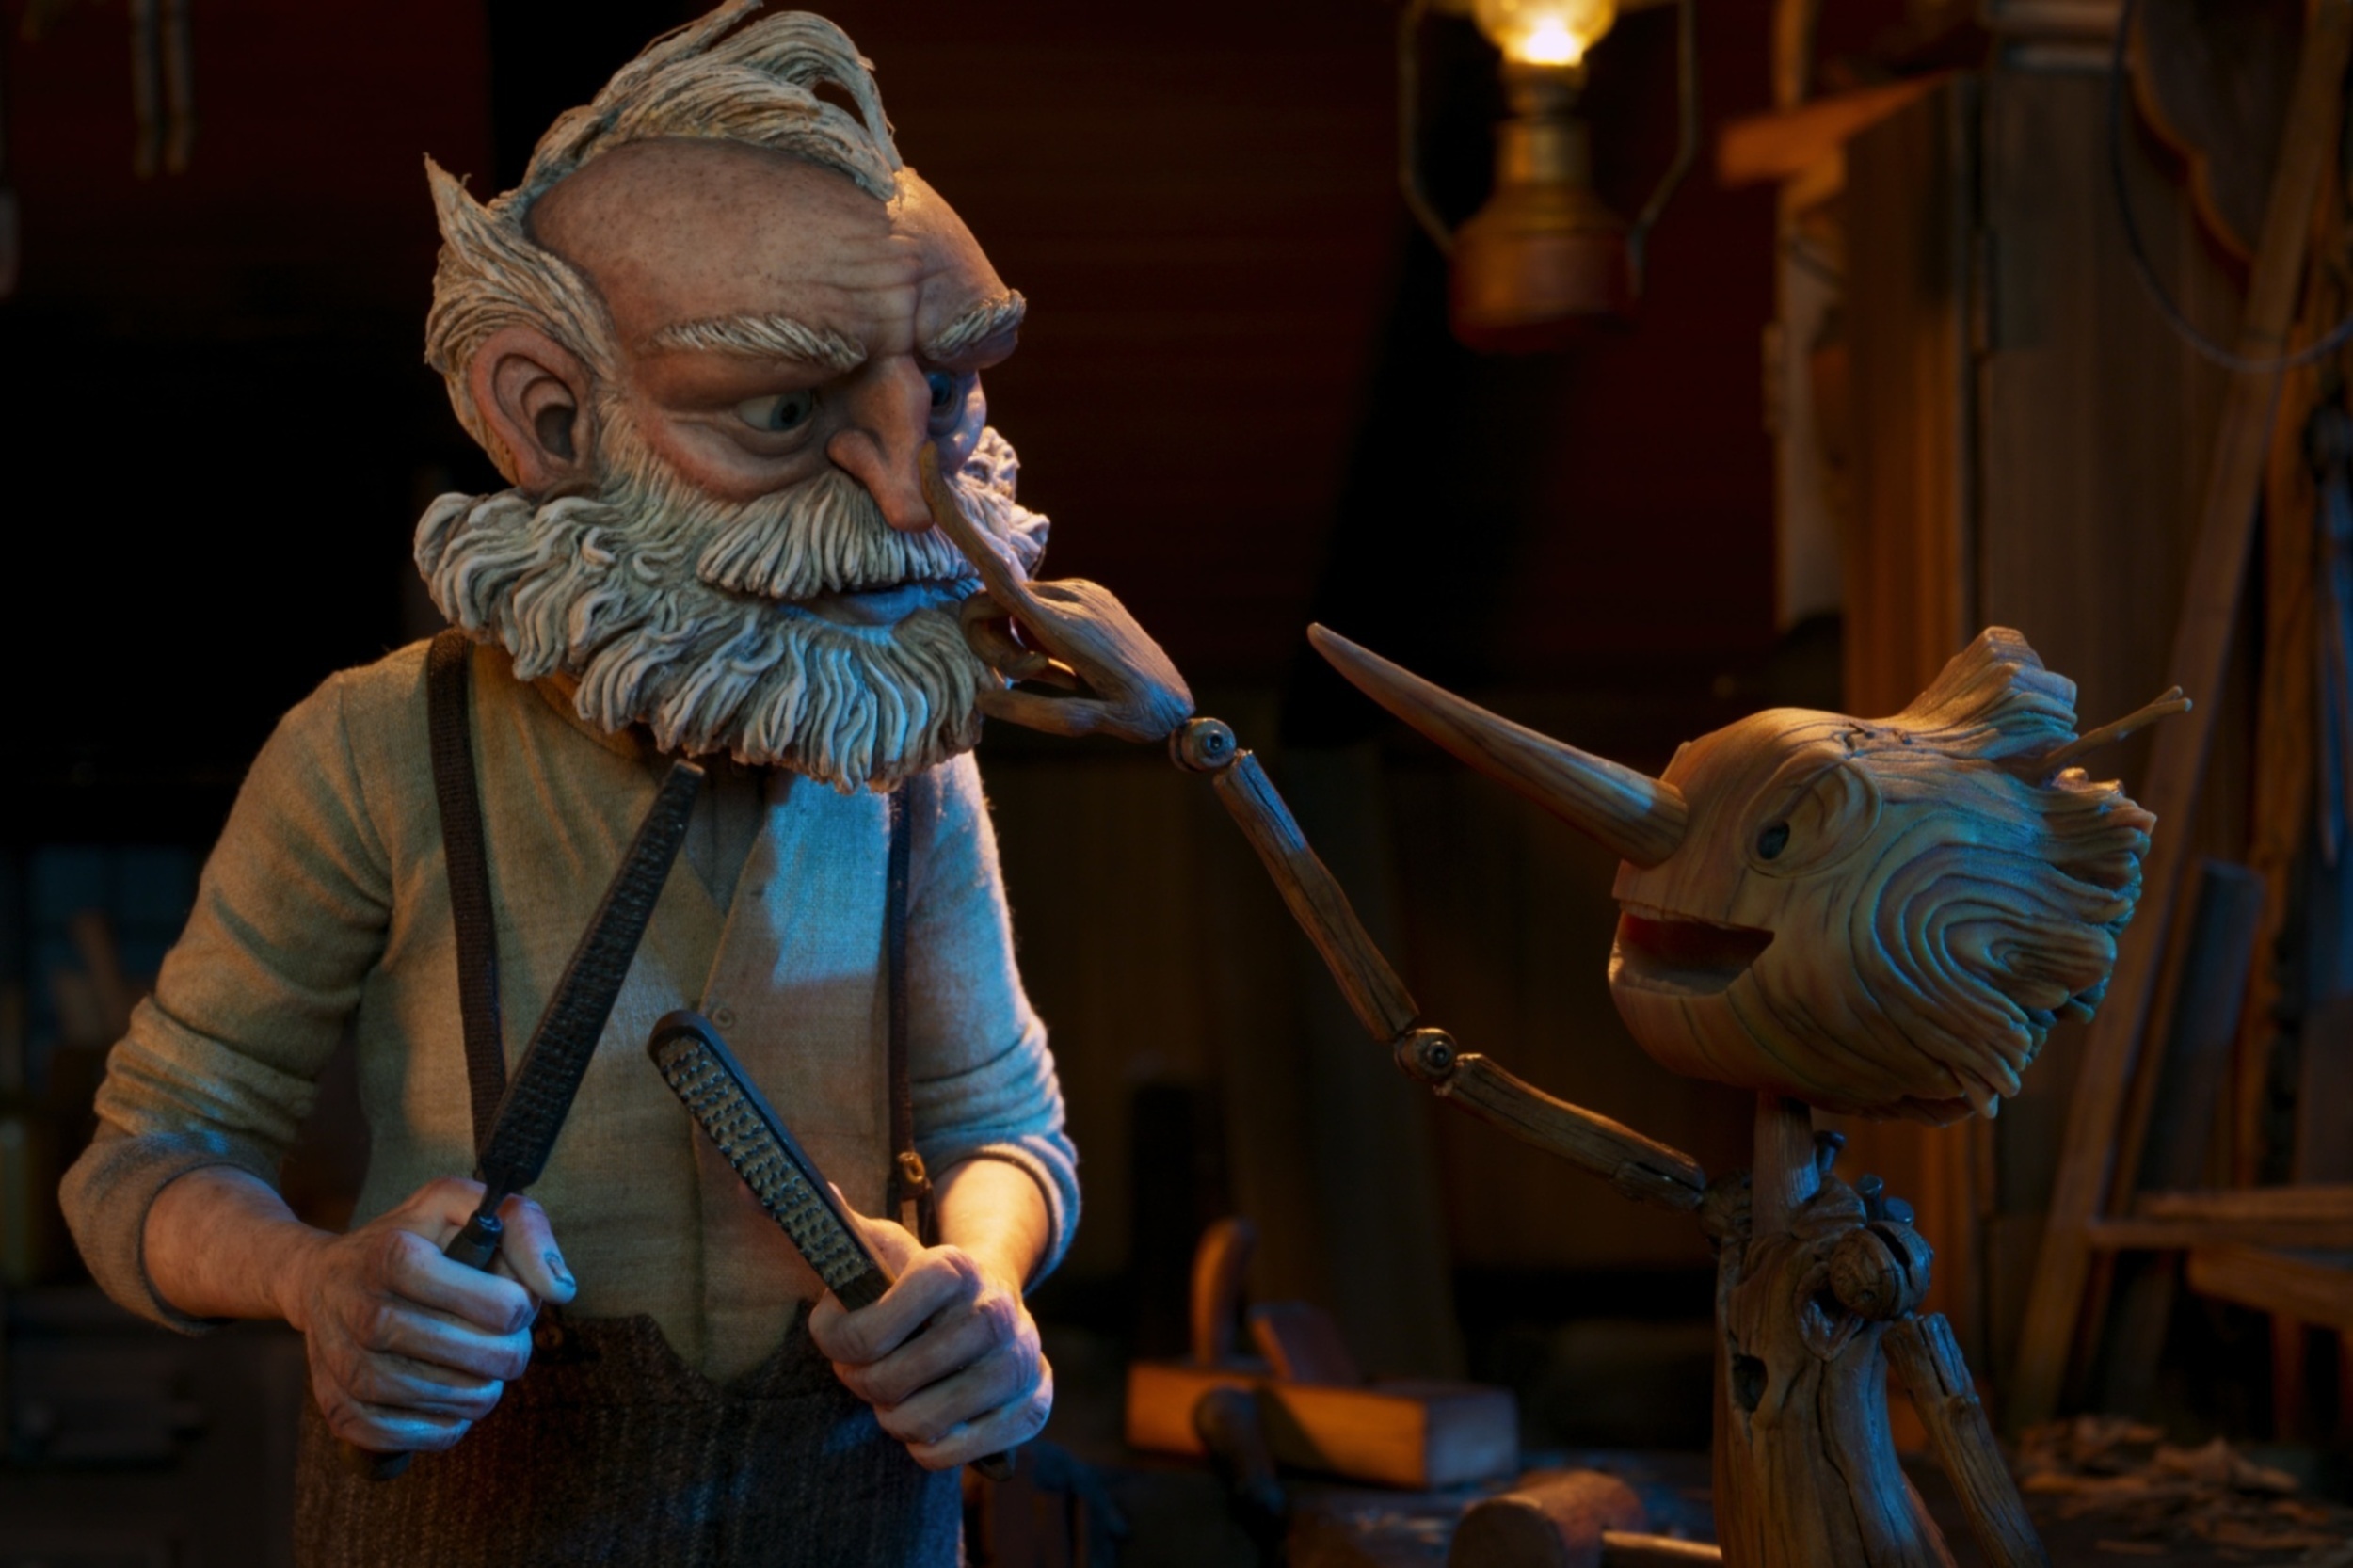 <p>Guillermo del Toro proves that animation isn’t just for kids with his darkly beautiful take on the classic <em>Pinocchio</em> story. Featuring meticulously crafted stop-motion animation, the film takes the narrative we know and love and sets it against the backdrop of wartime Italy and the rise of Mussolini. It’s an inspired choice, but it works exquisitely, bringing fantasy and reality together and breathing new life into an over-told tale. There is also incredible voice work from Ewan McGregor, Tilda Swinton, and more.</p><p><a href='https://www.msn.com/en-us/community/channel/vid-cj9pqbr0vn9in2b6ddcd8sfgpfq6x6utp44fssrv6mc2gtybw0us'>Follow us on MSN to see more of our exclusive entertainment content.</a></p>